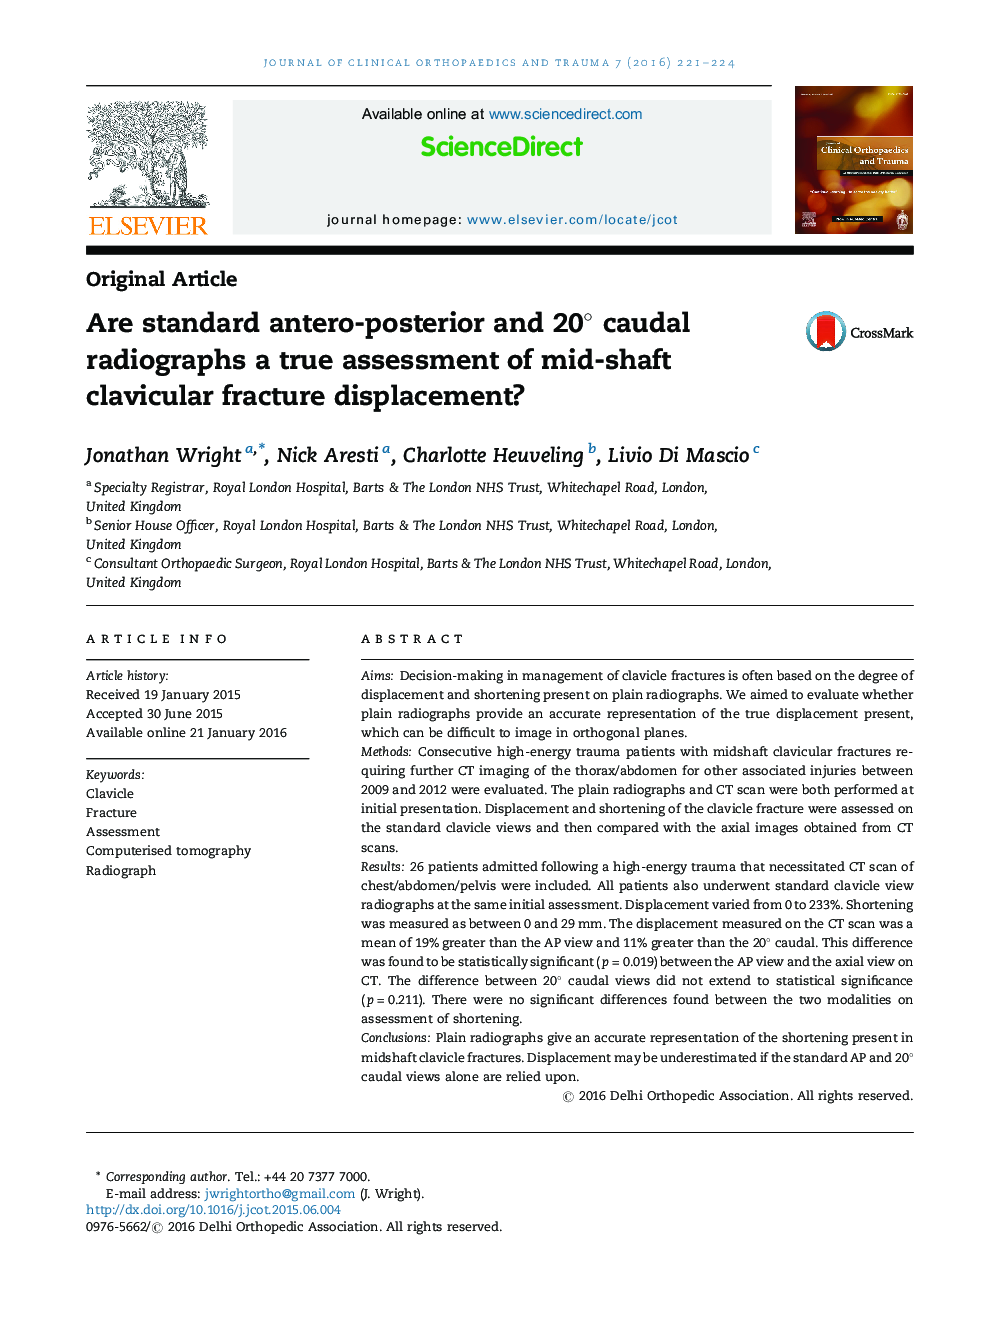 Are standard antero-posterior and 20Â° caudal radiographs a true assessment of mid-shaft clavicular fracture displacement?